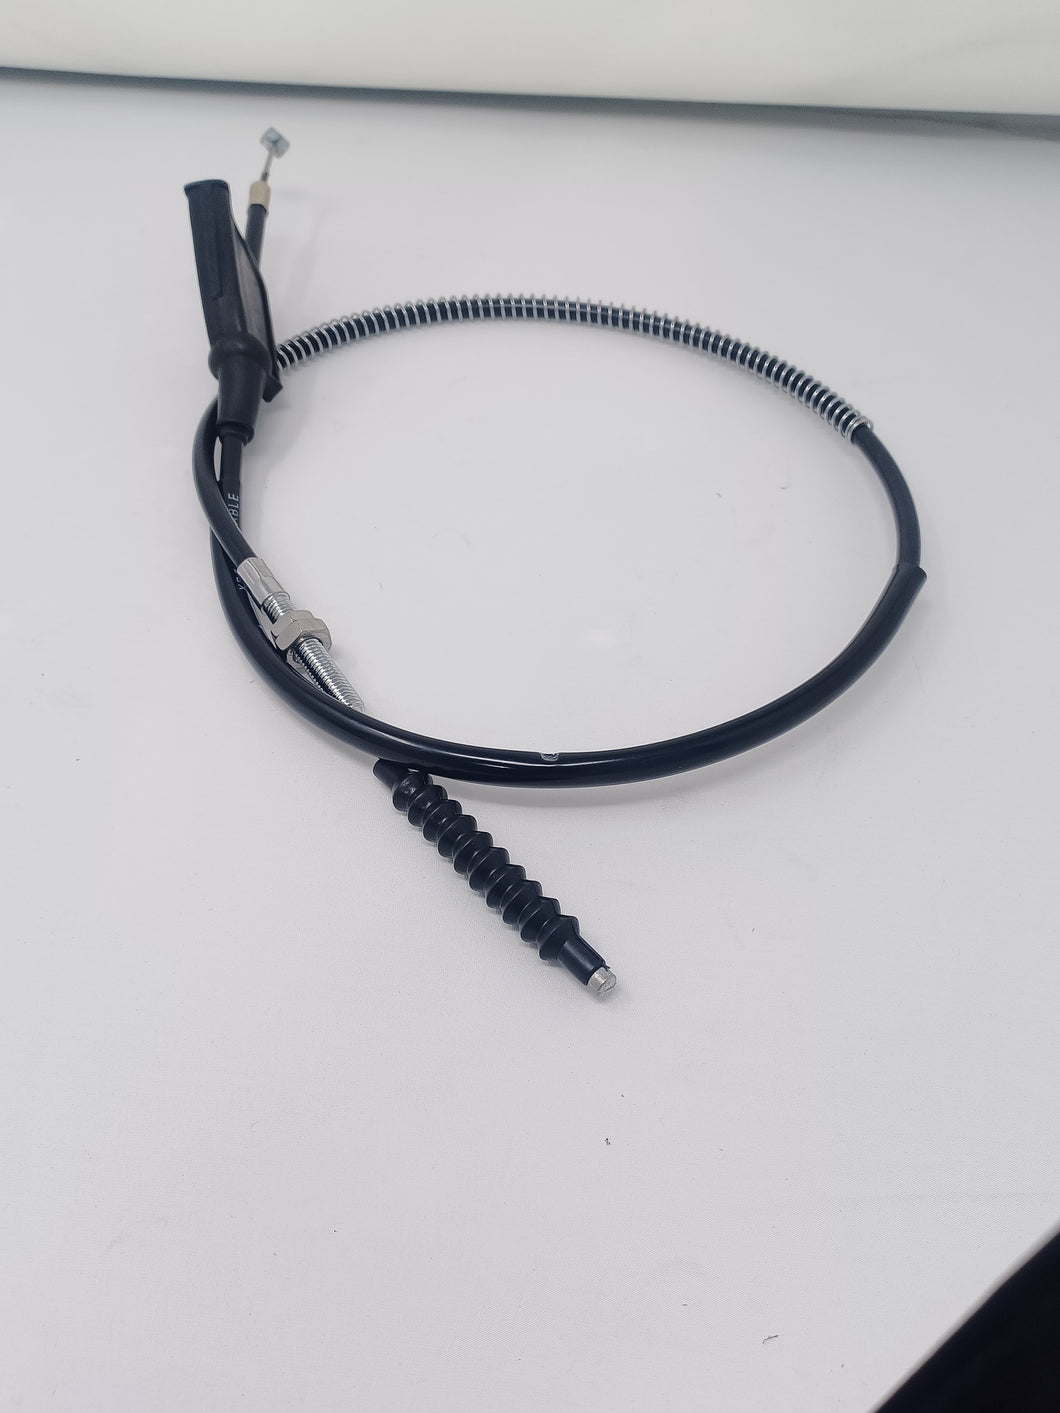 X22R 250cc Clutch Cable 08020100